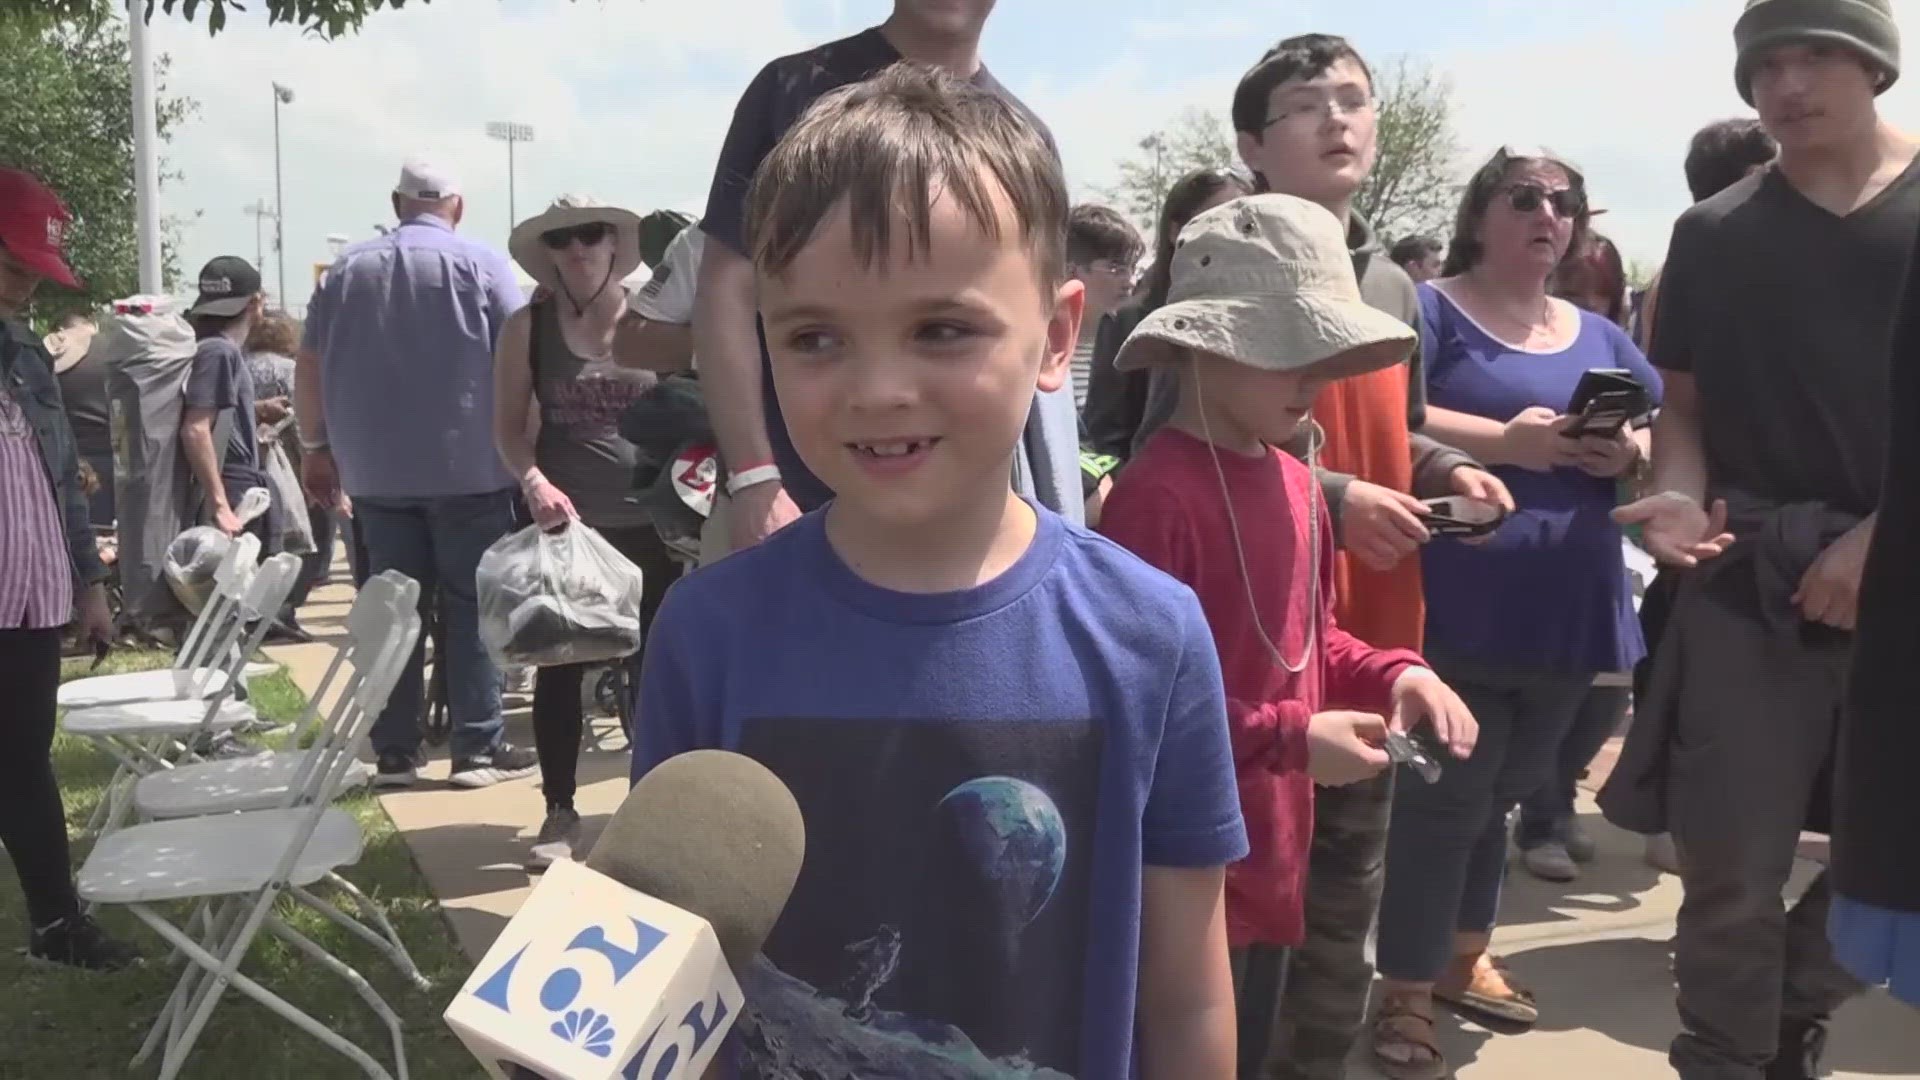 These kids couldn't believe their eyes when witnessing the once in a lifetime event.